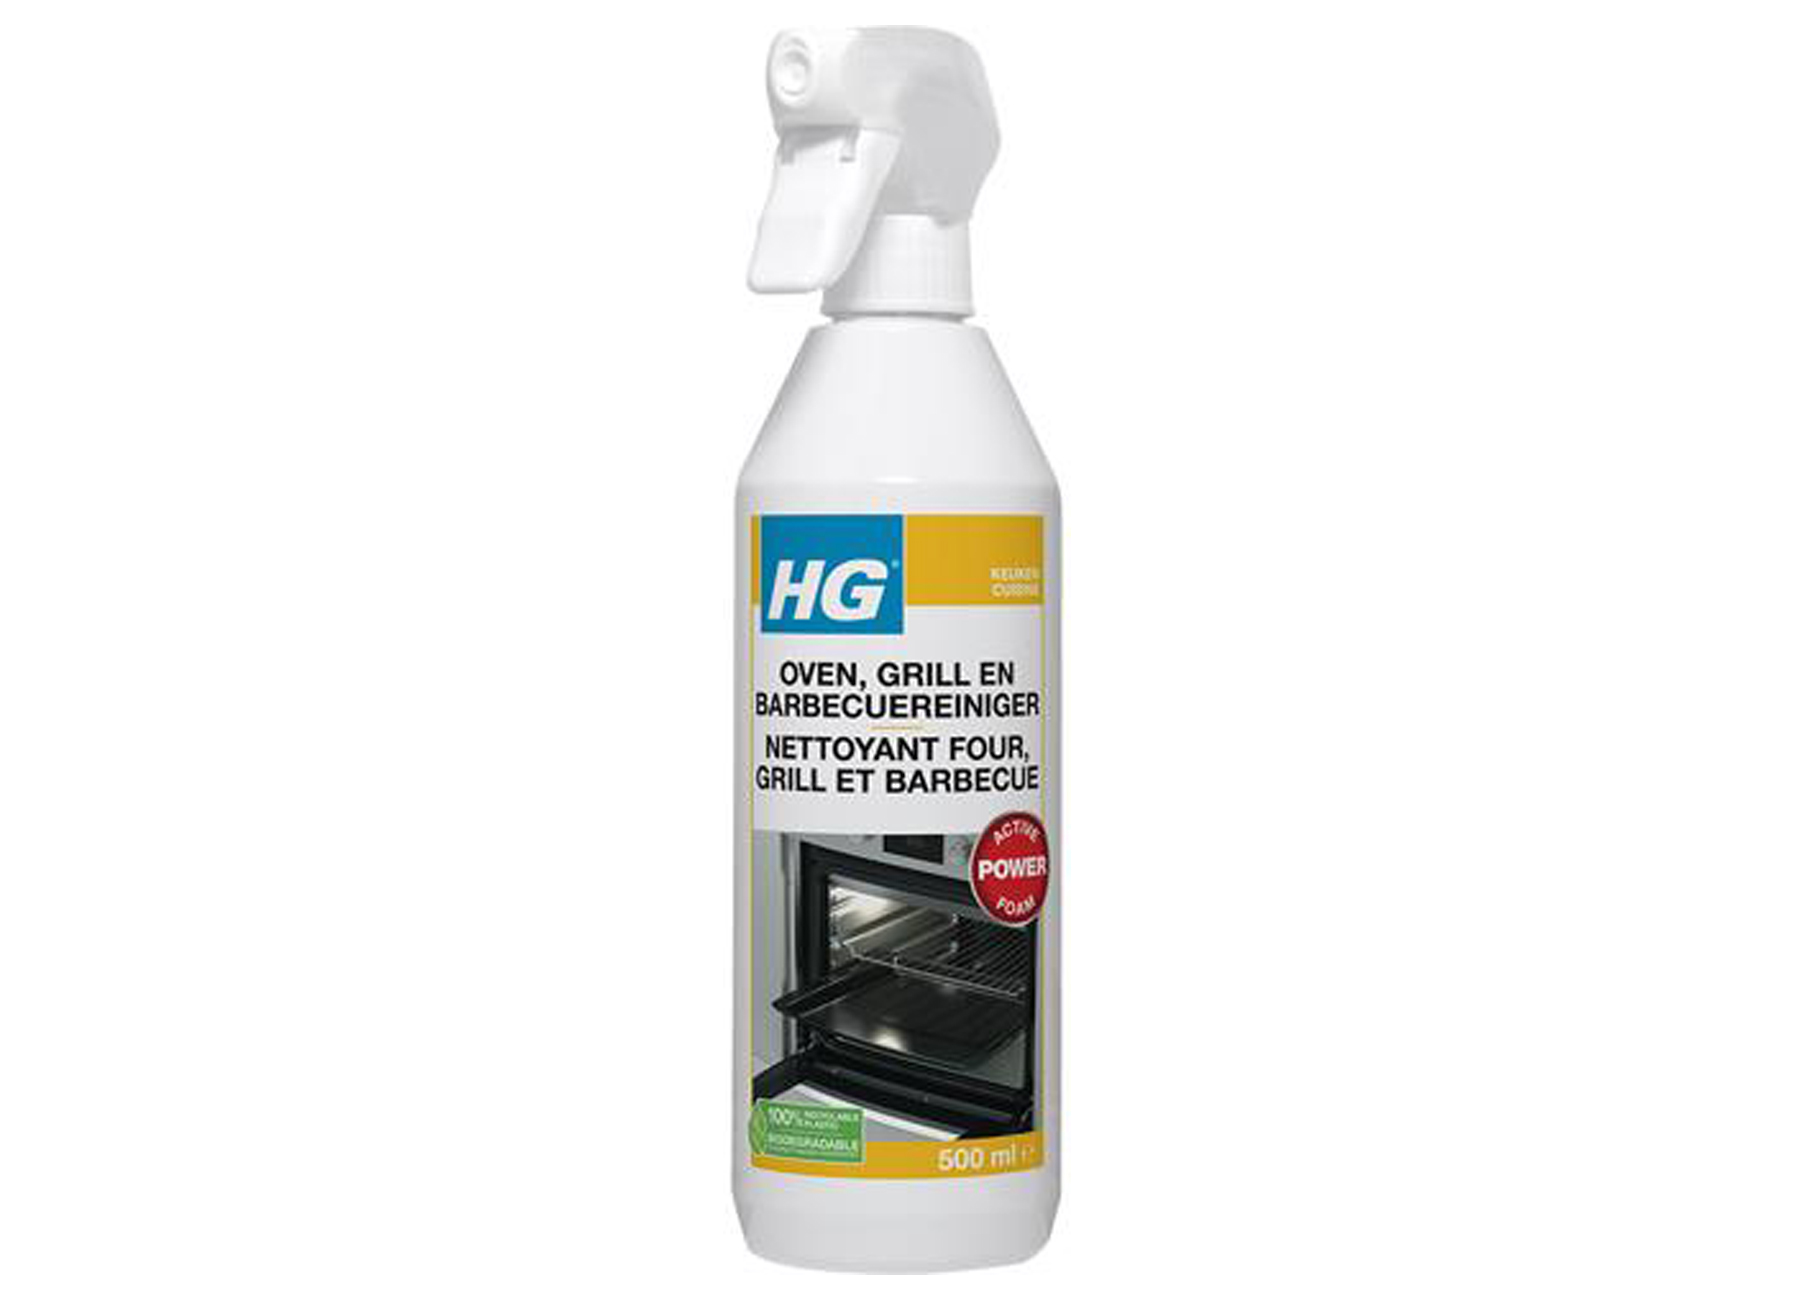 HG NETTOYANT FOUR, GRILL & BARBECUE 500ML